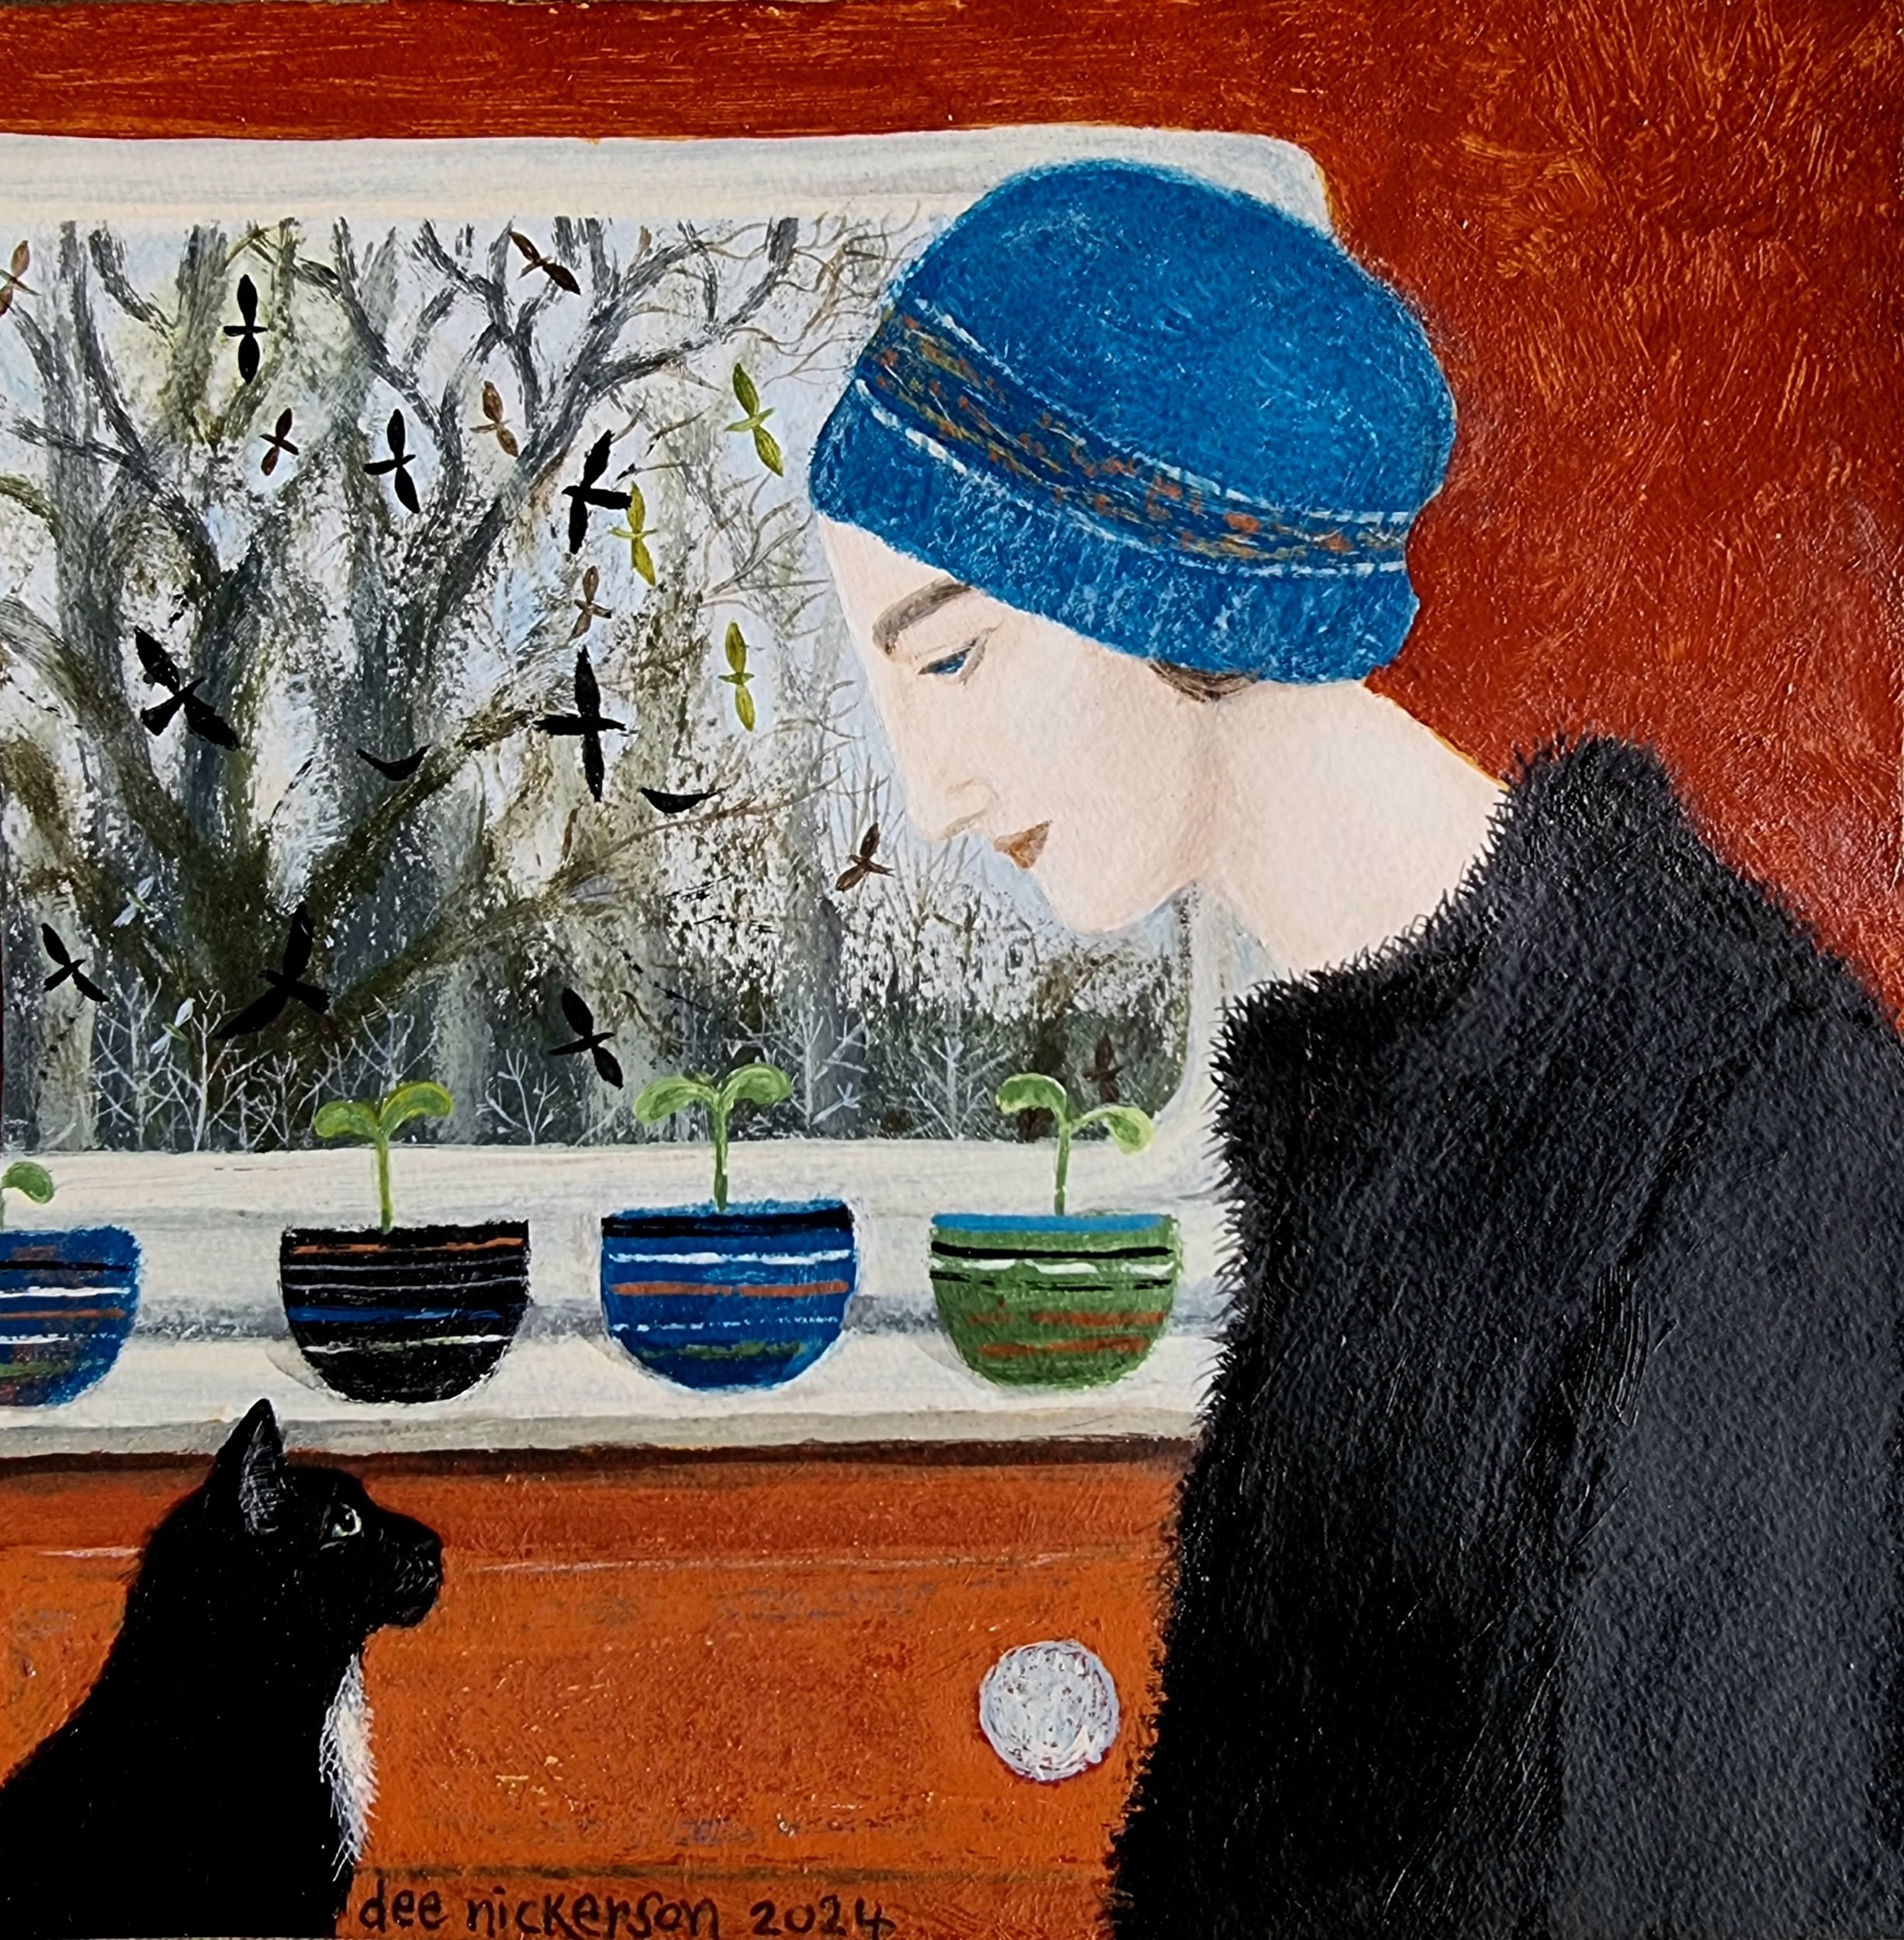 Dee Nickerson - New collection coming